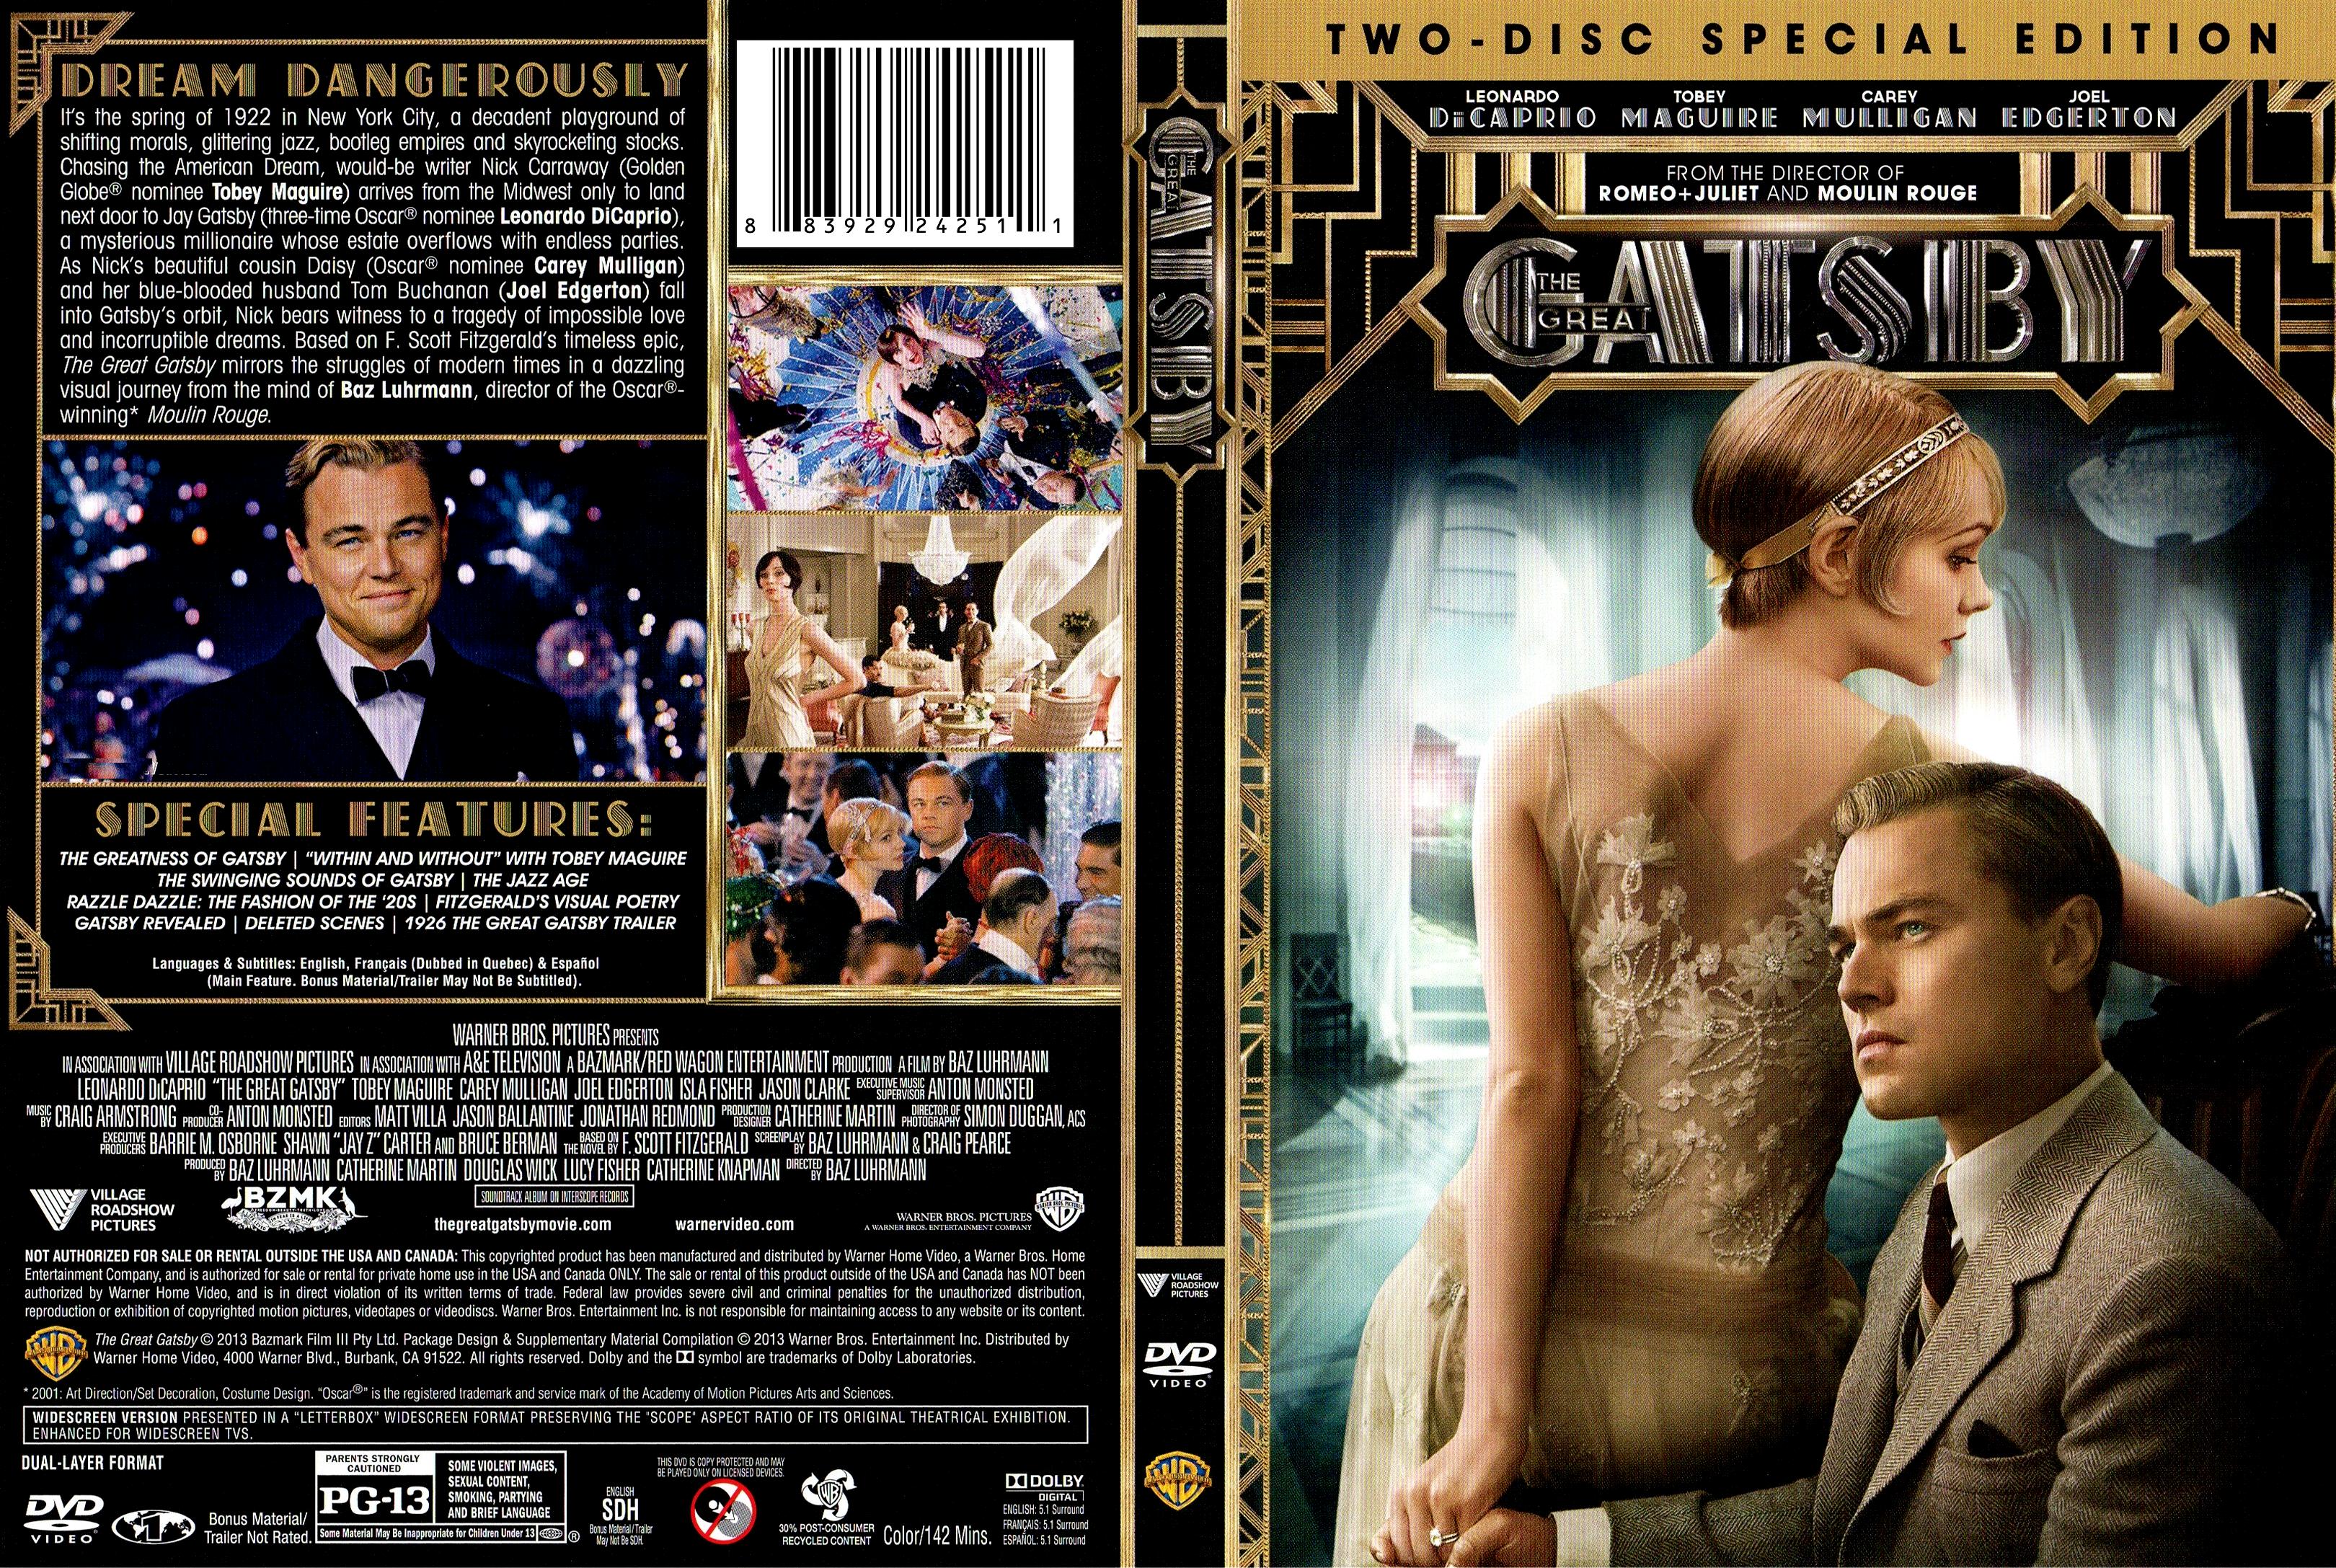 Jaquette DVD The Great Gatsby - Gatsby le Magnifique Zone 1